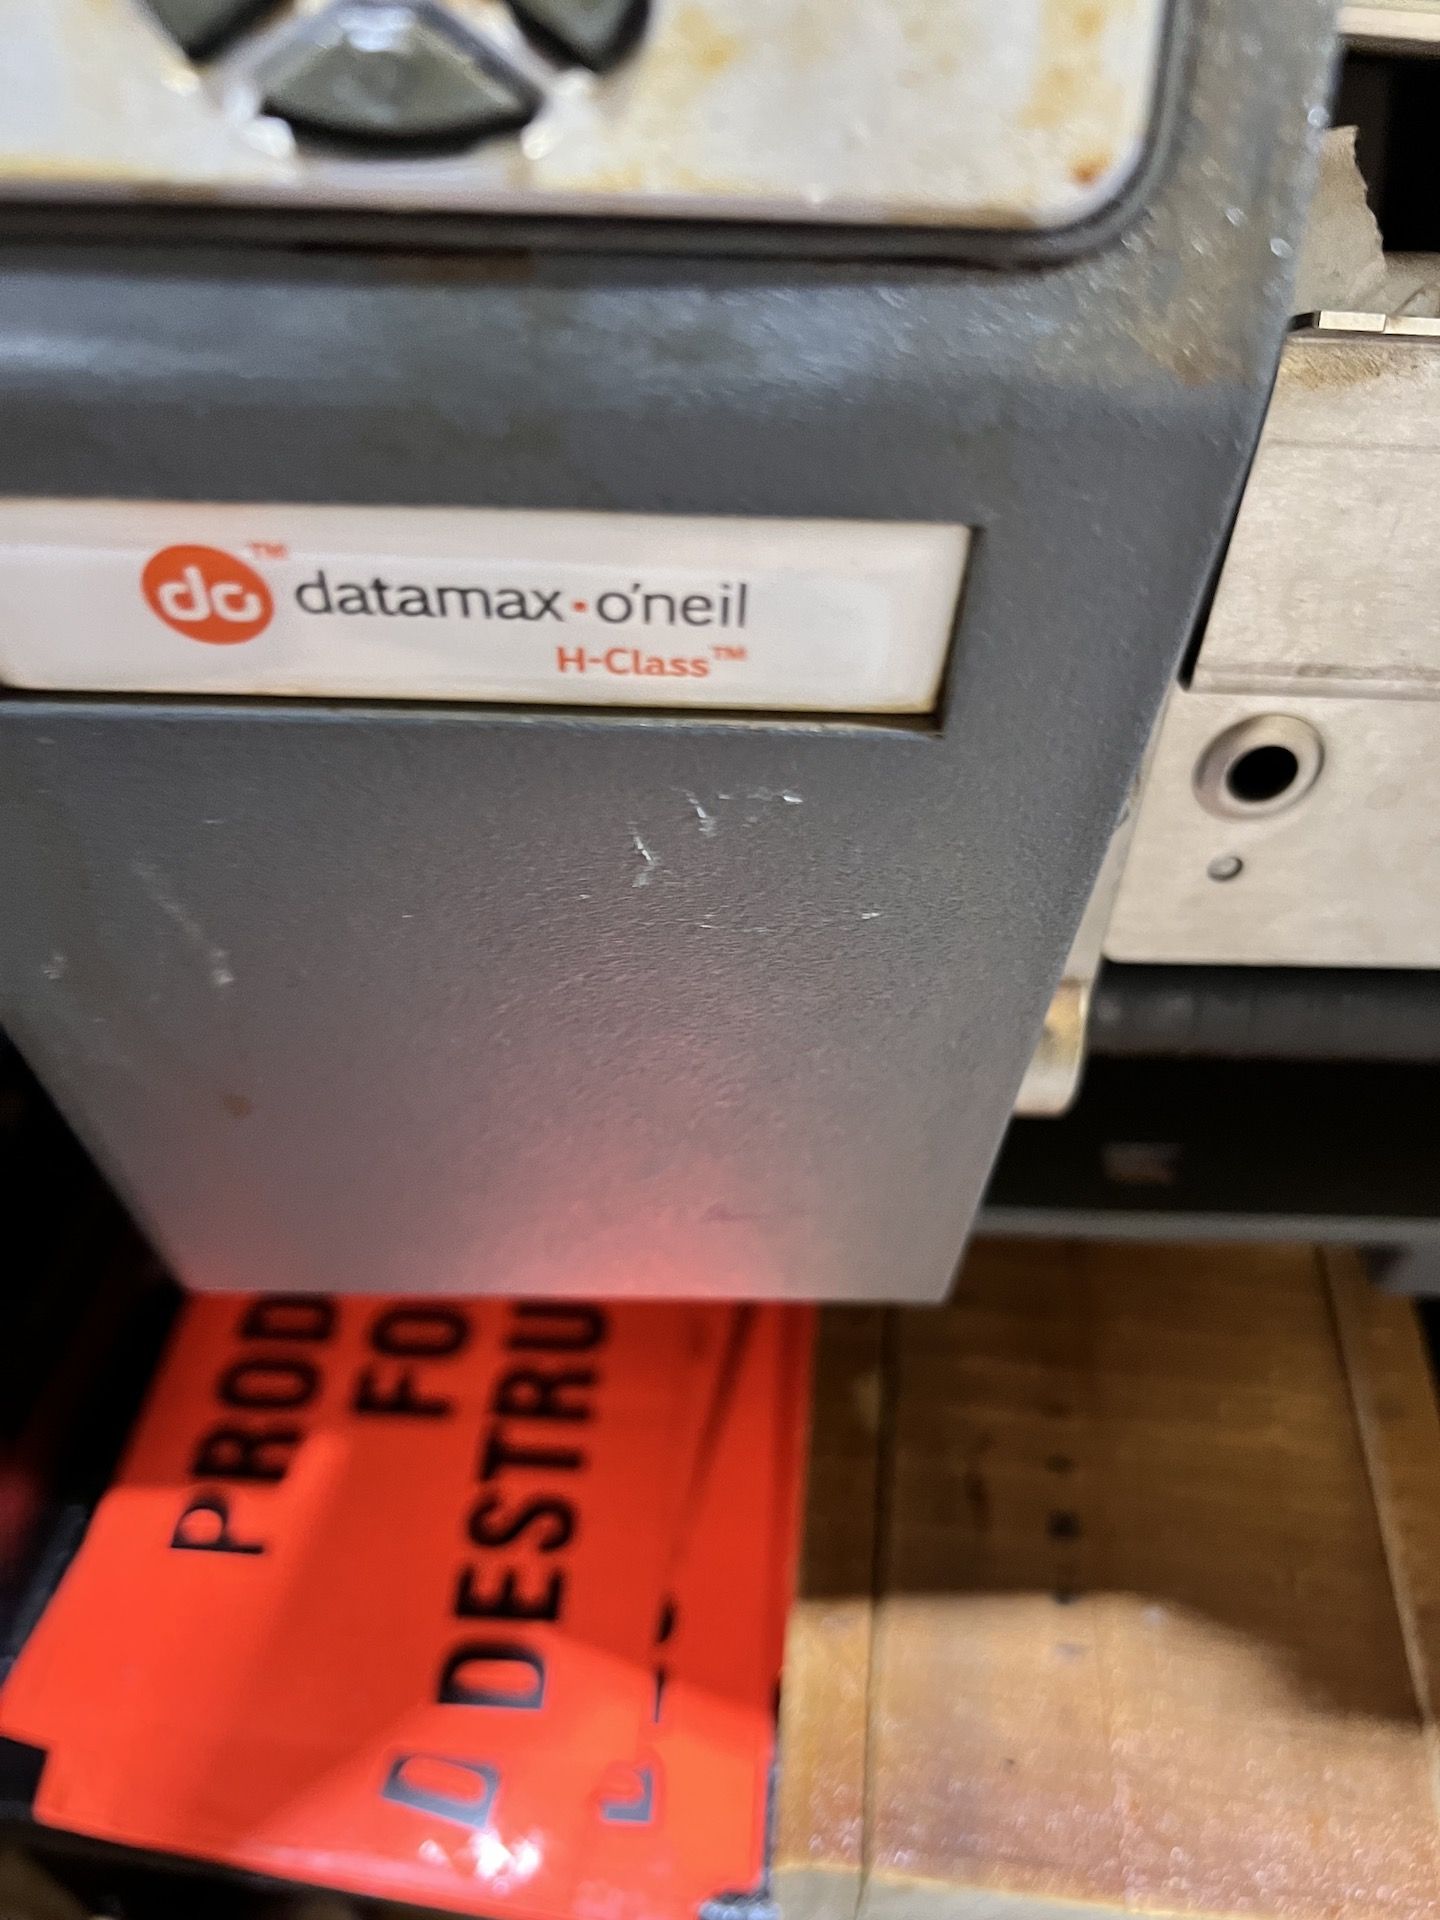 MODULAR INDUSTRIAL CONTROL CABINET WITH (2) DATAMAX O'NEIL H-CLASS THERMAL LABEL PRINTERS - Image 7 of 10